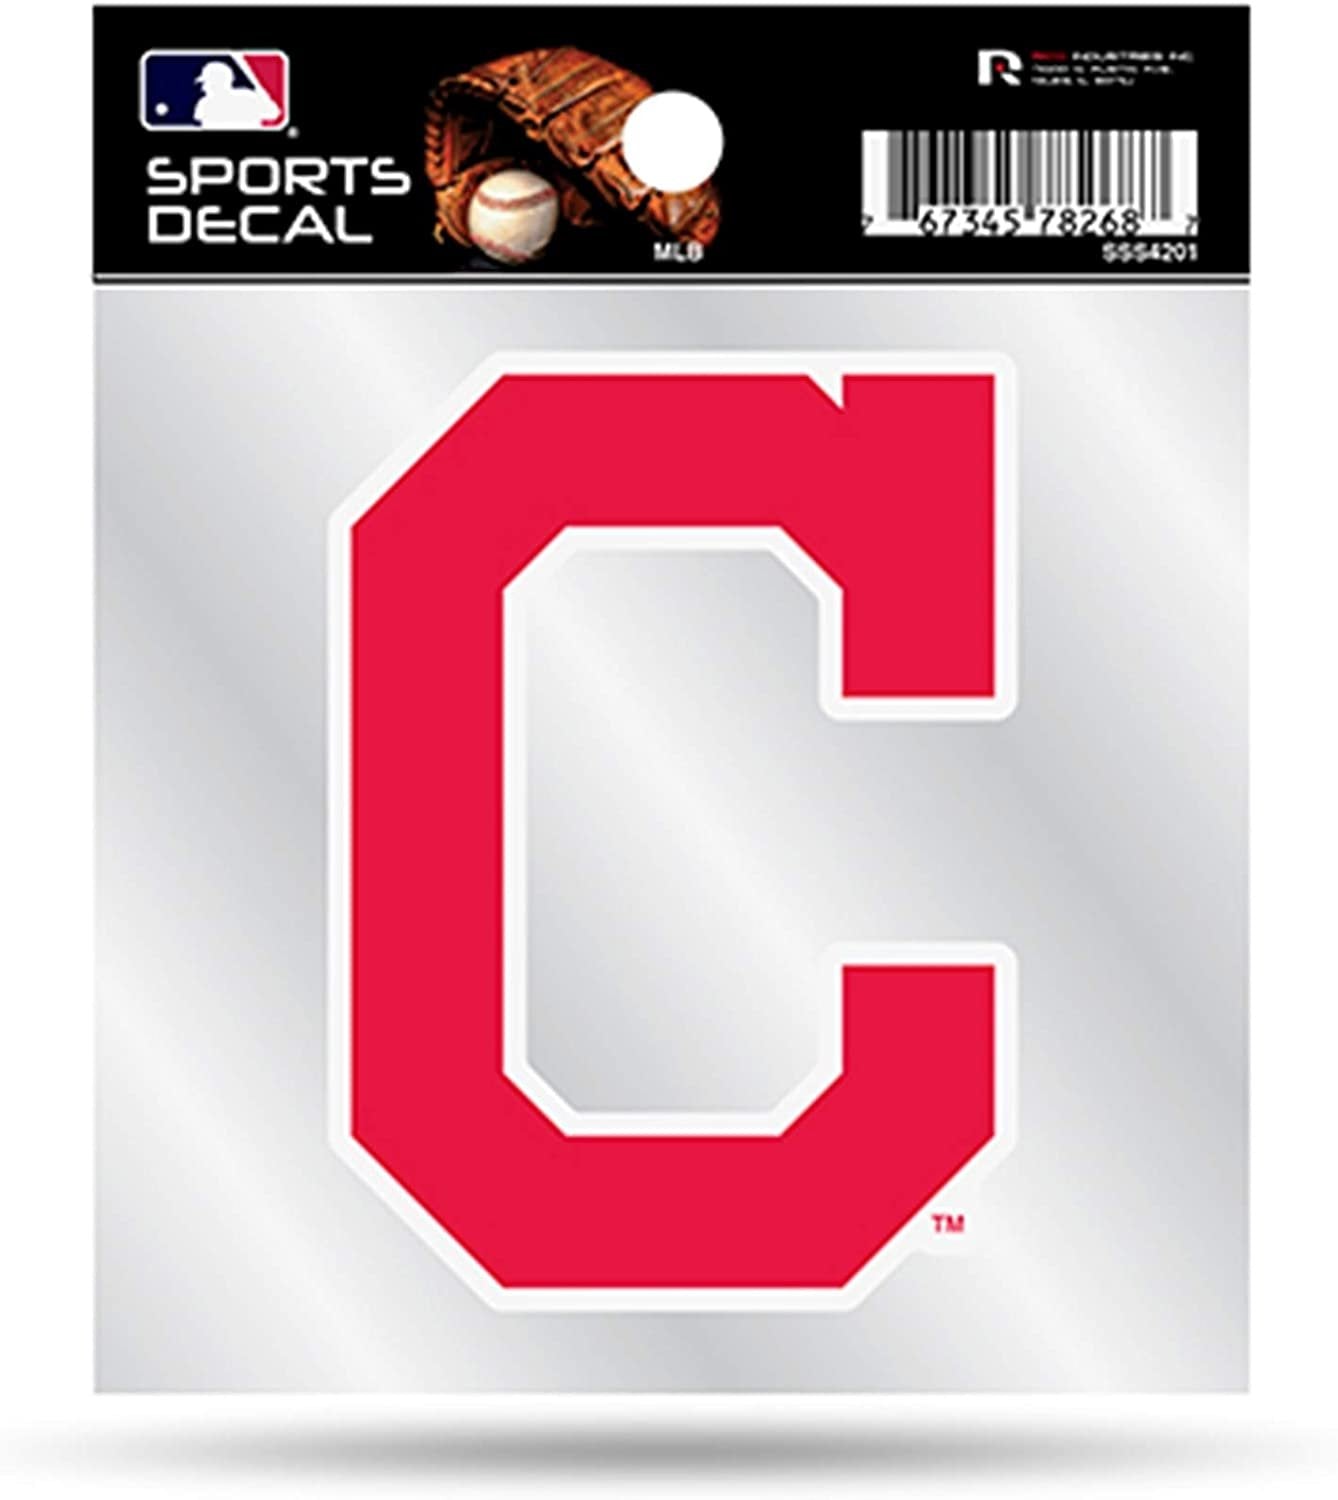 Cleveland Indians Premium 4x4 Decal with Clear Backing Flat Vinyl Auto Home Sticker Baseball